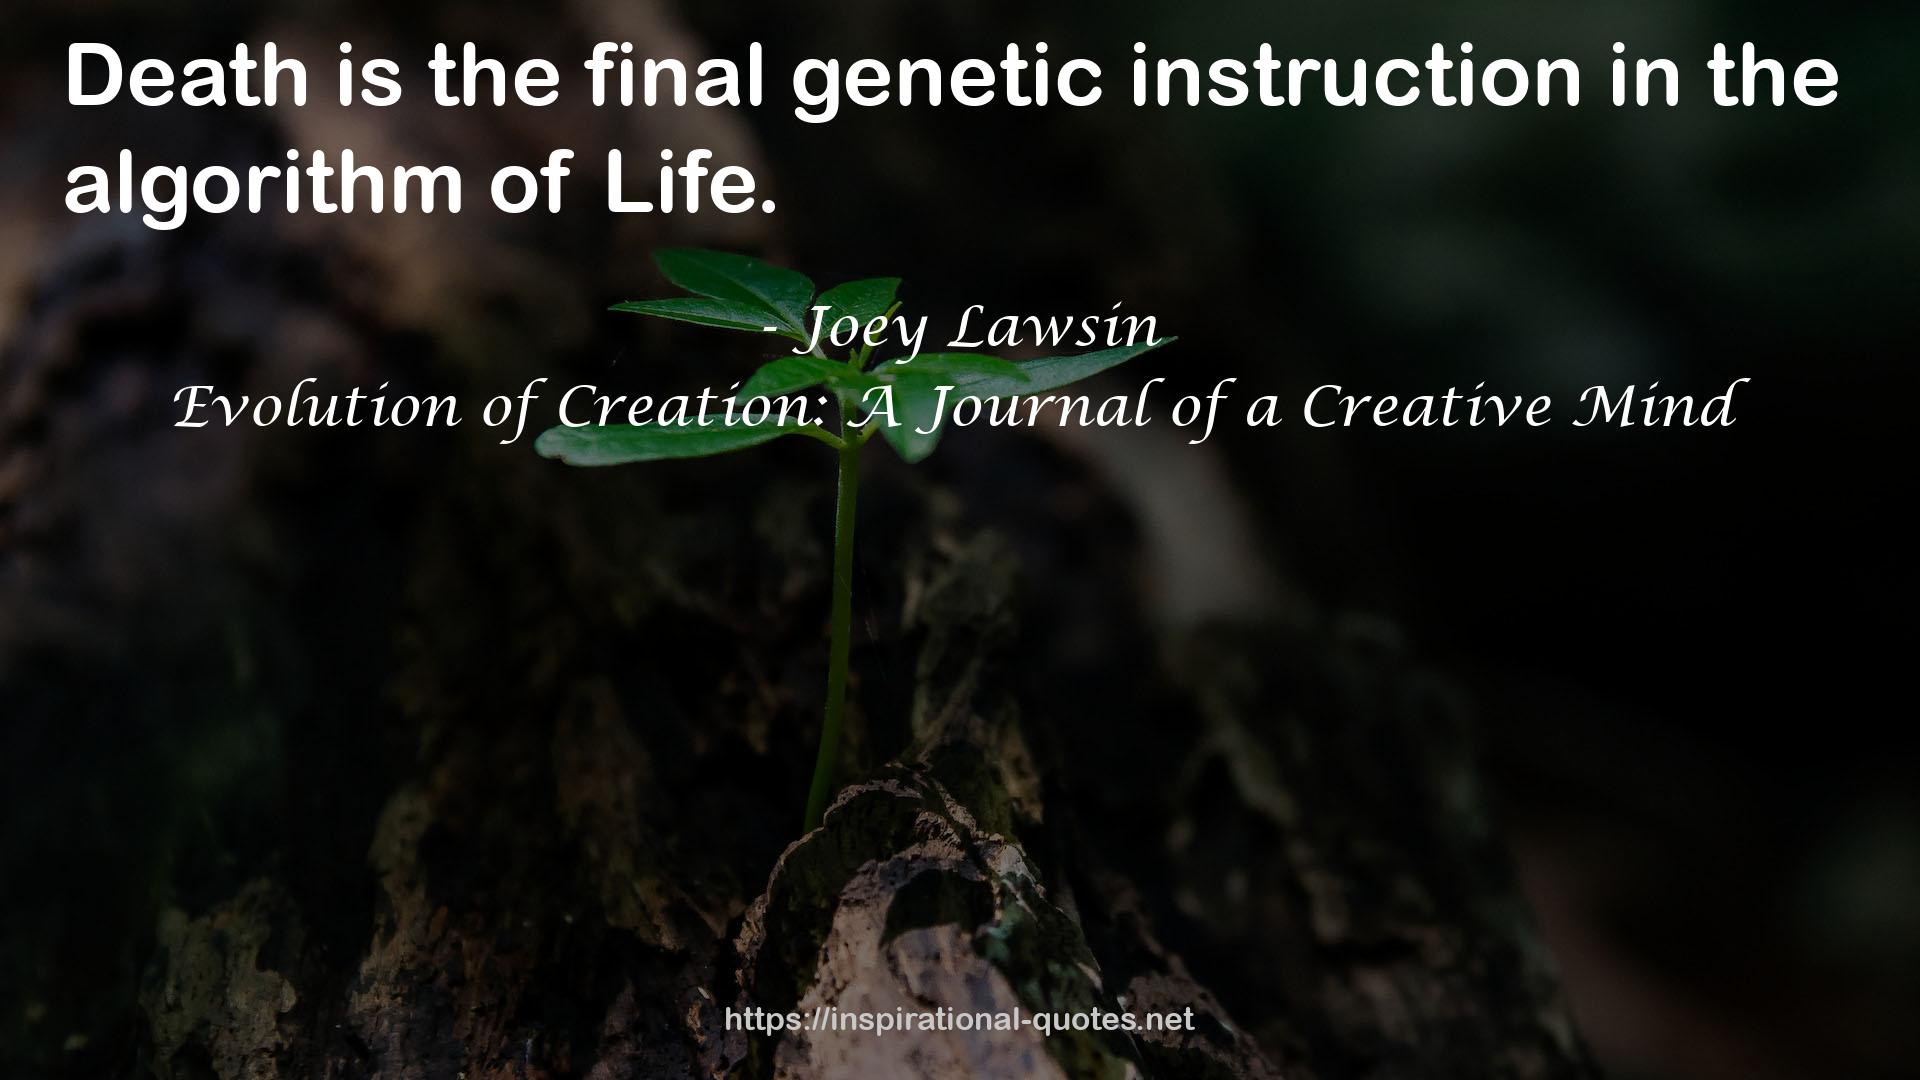 Evolution of Creation: A Journal of a Creative Mind QUOTES